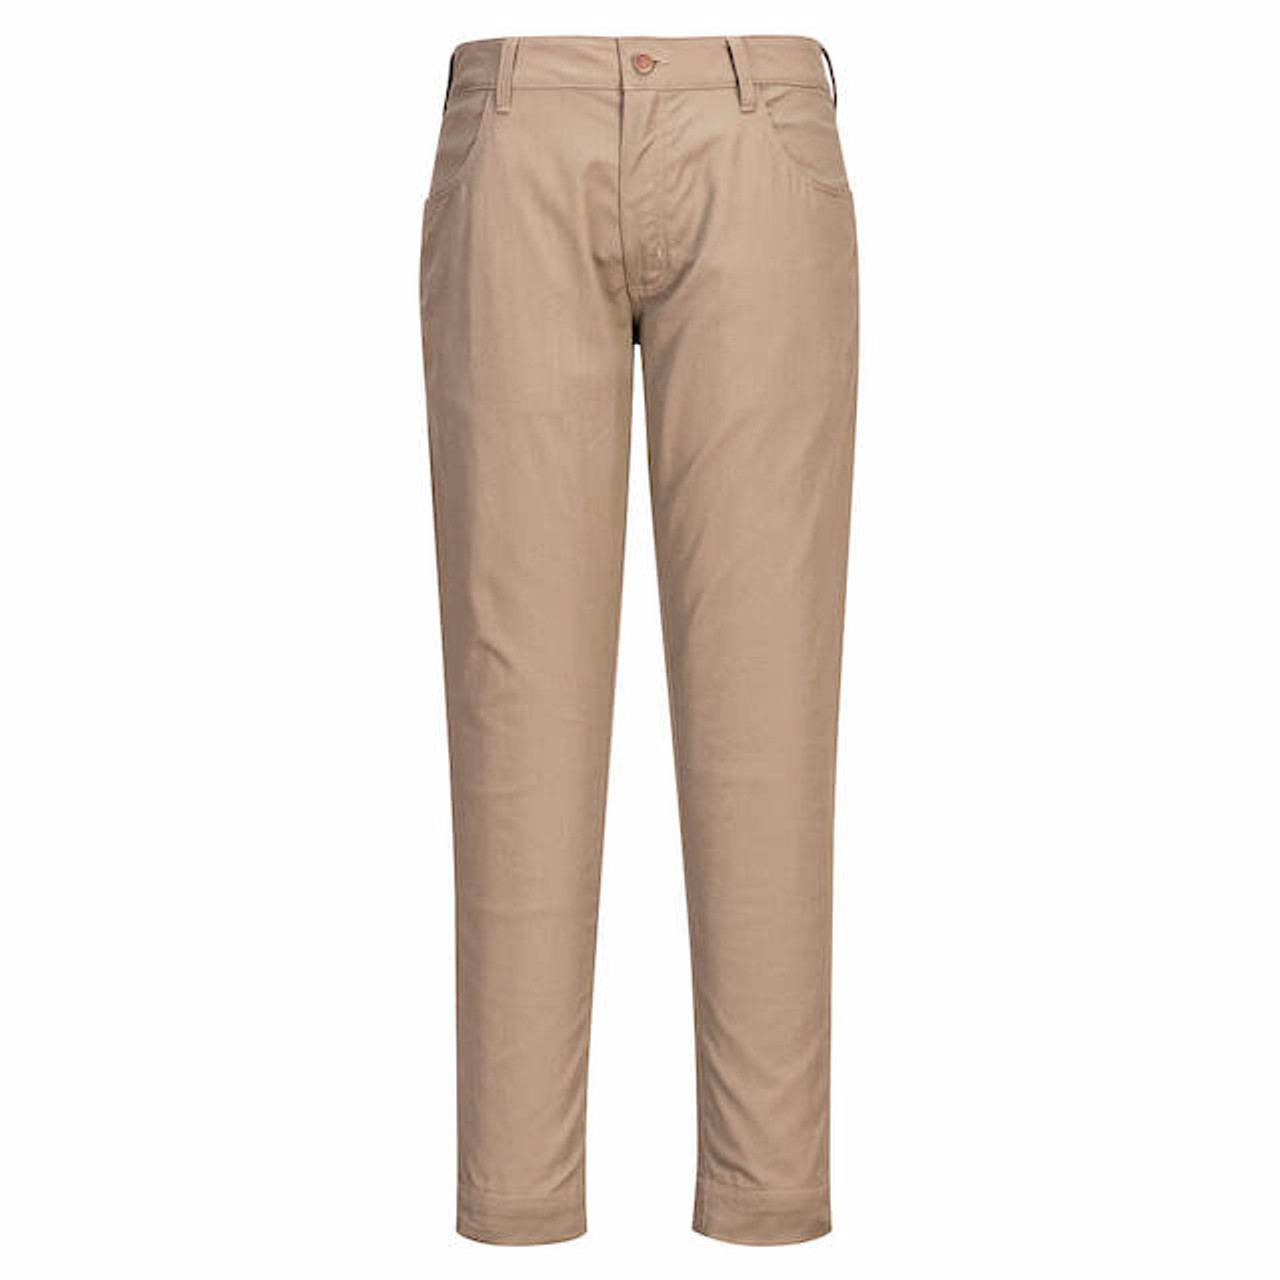 Womens Work Pants, Stretchy Work Pants for Women